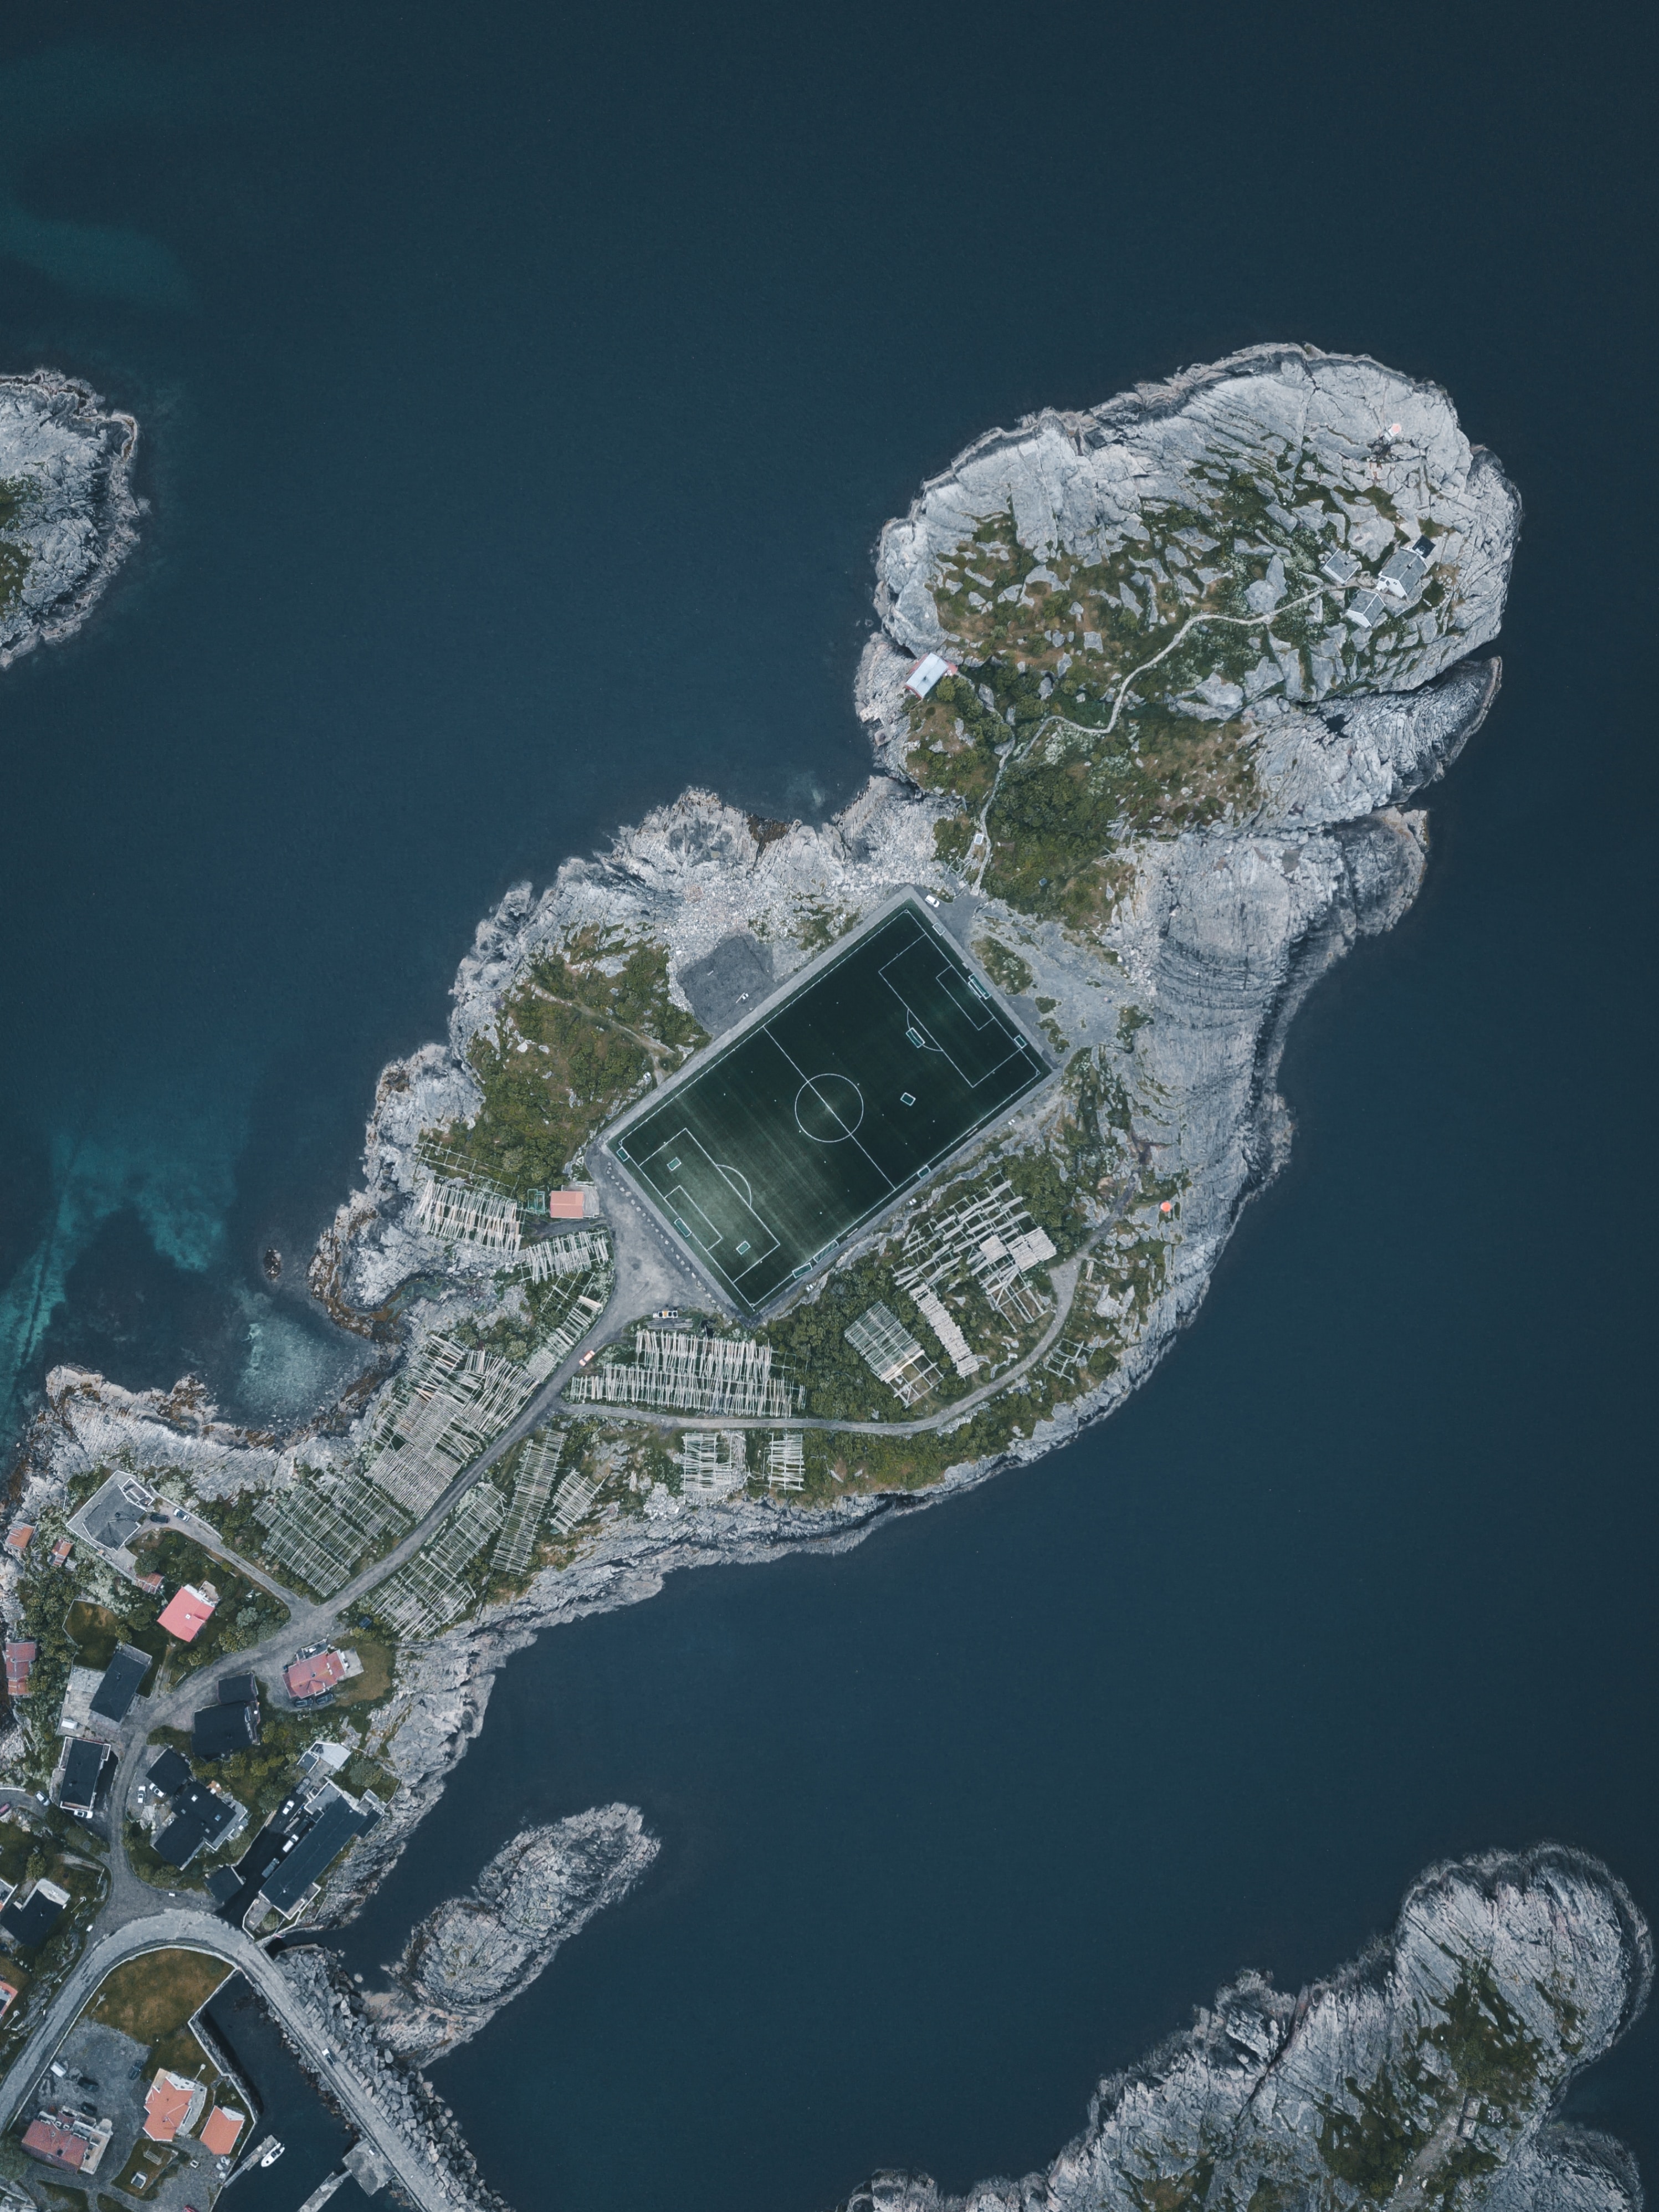 football field, playground, water, view from above, miscellanea, miscellaneous, platform, island